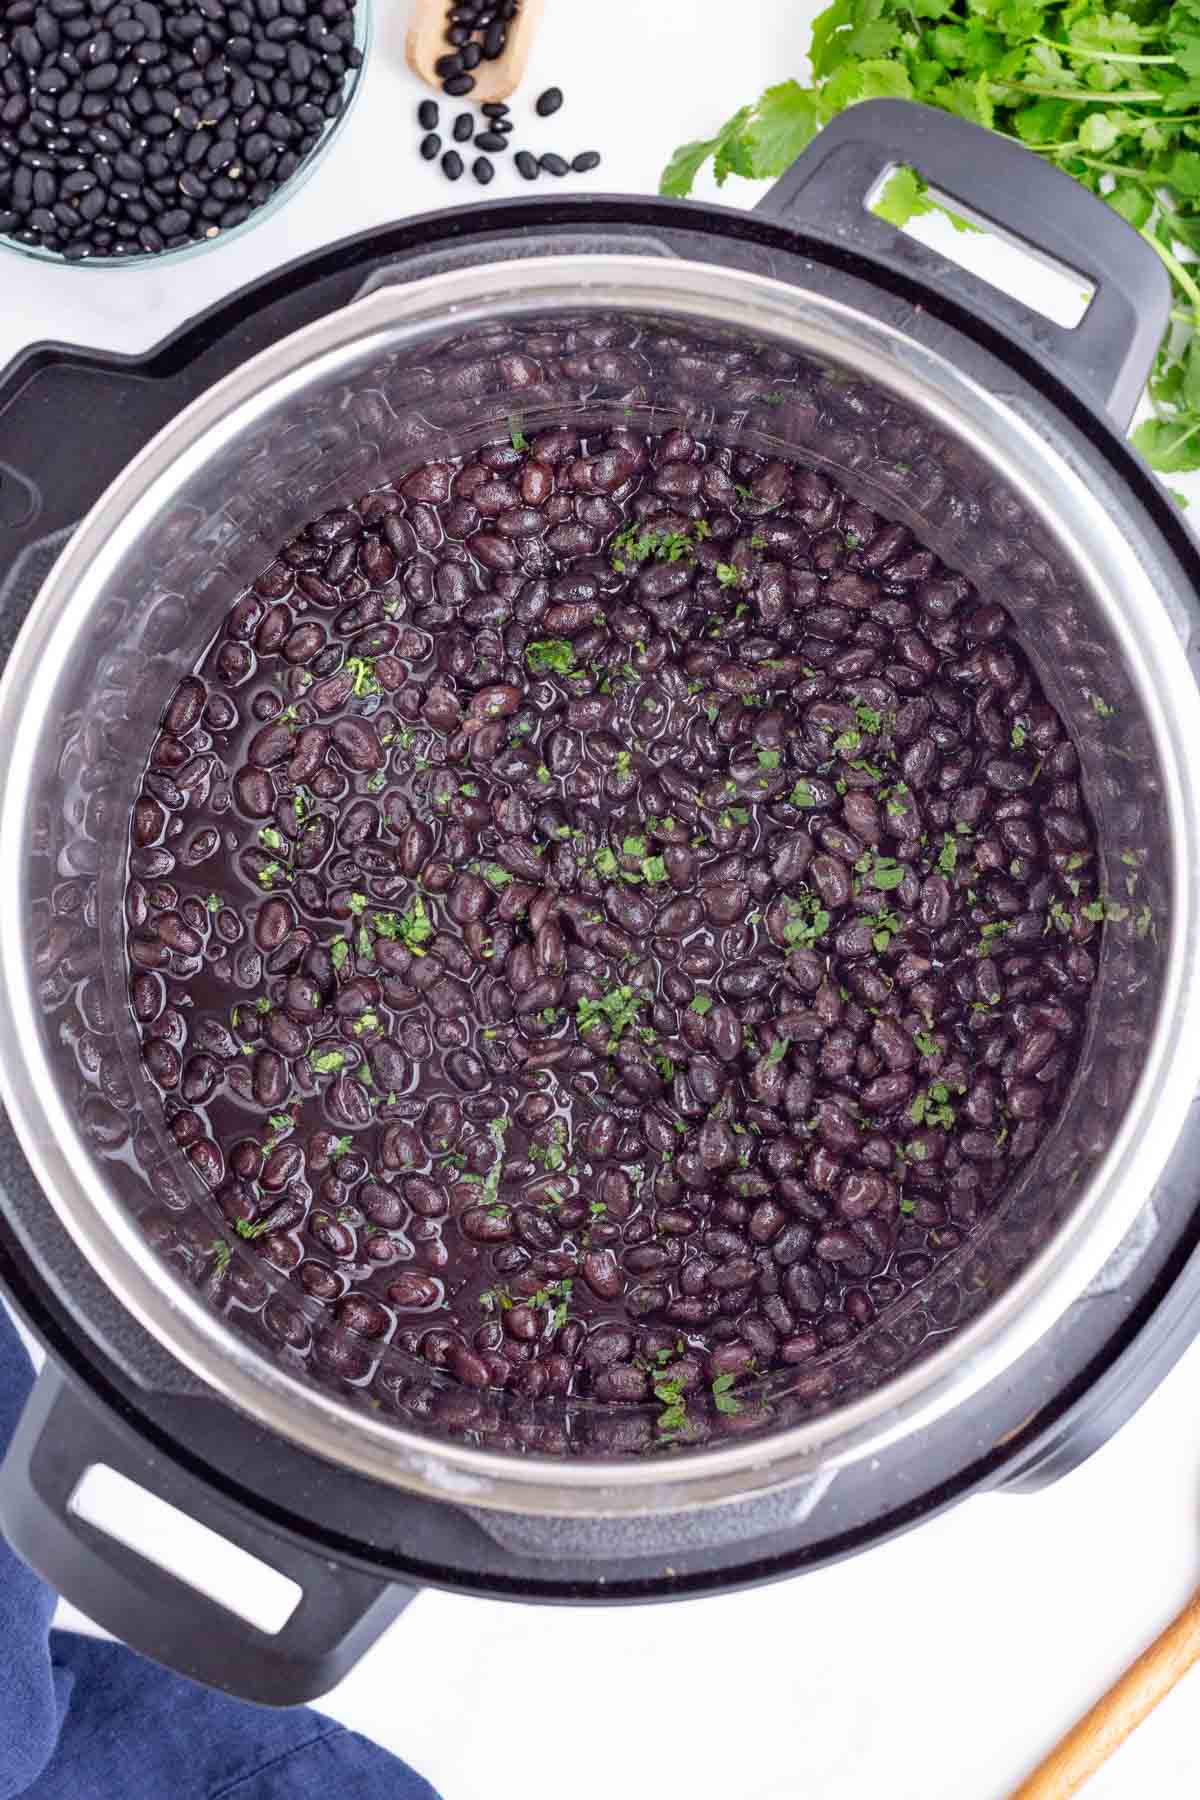 Black beans are cooked in an Instant Pot.